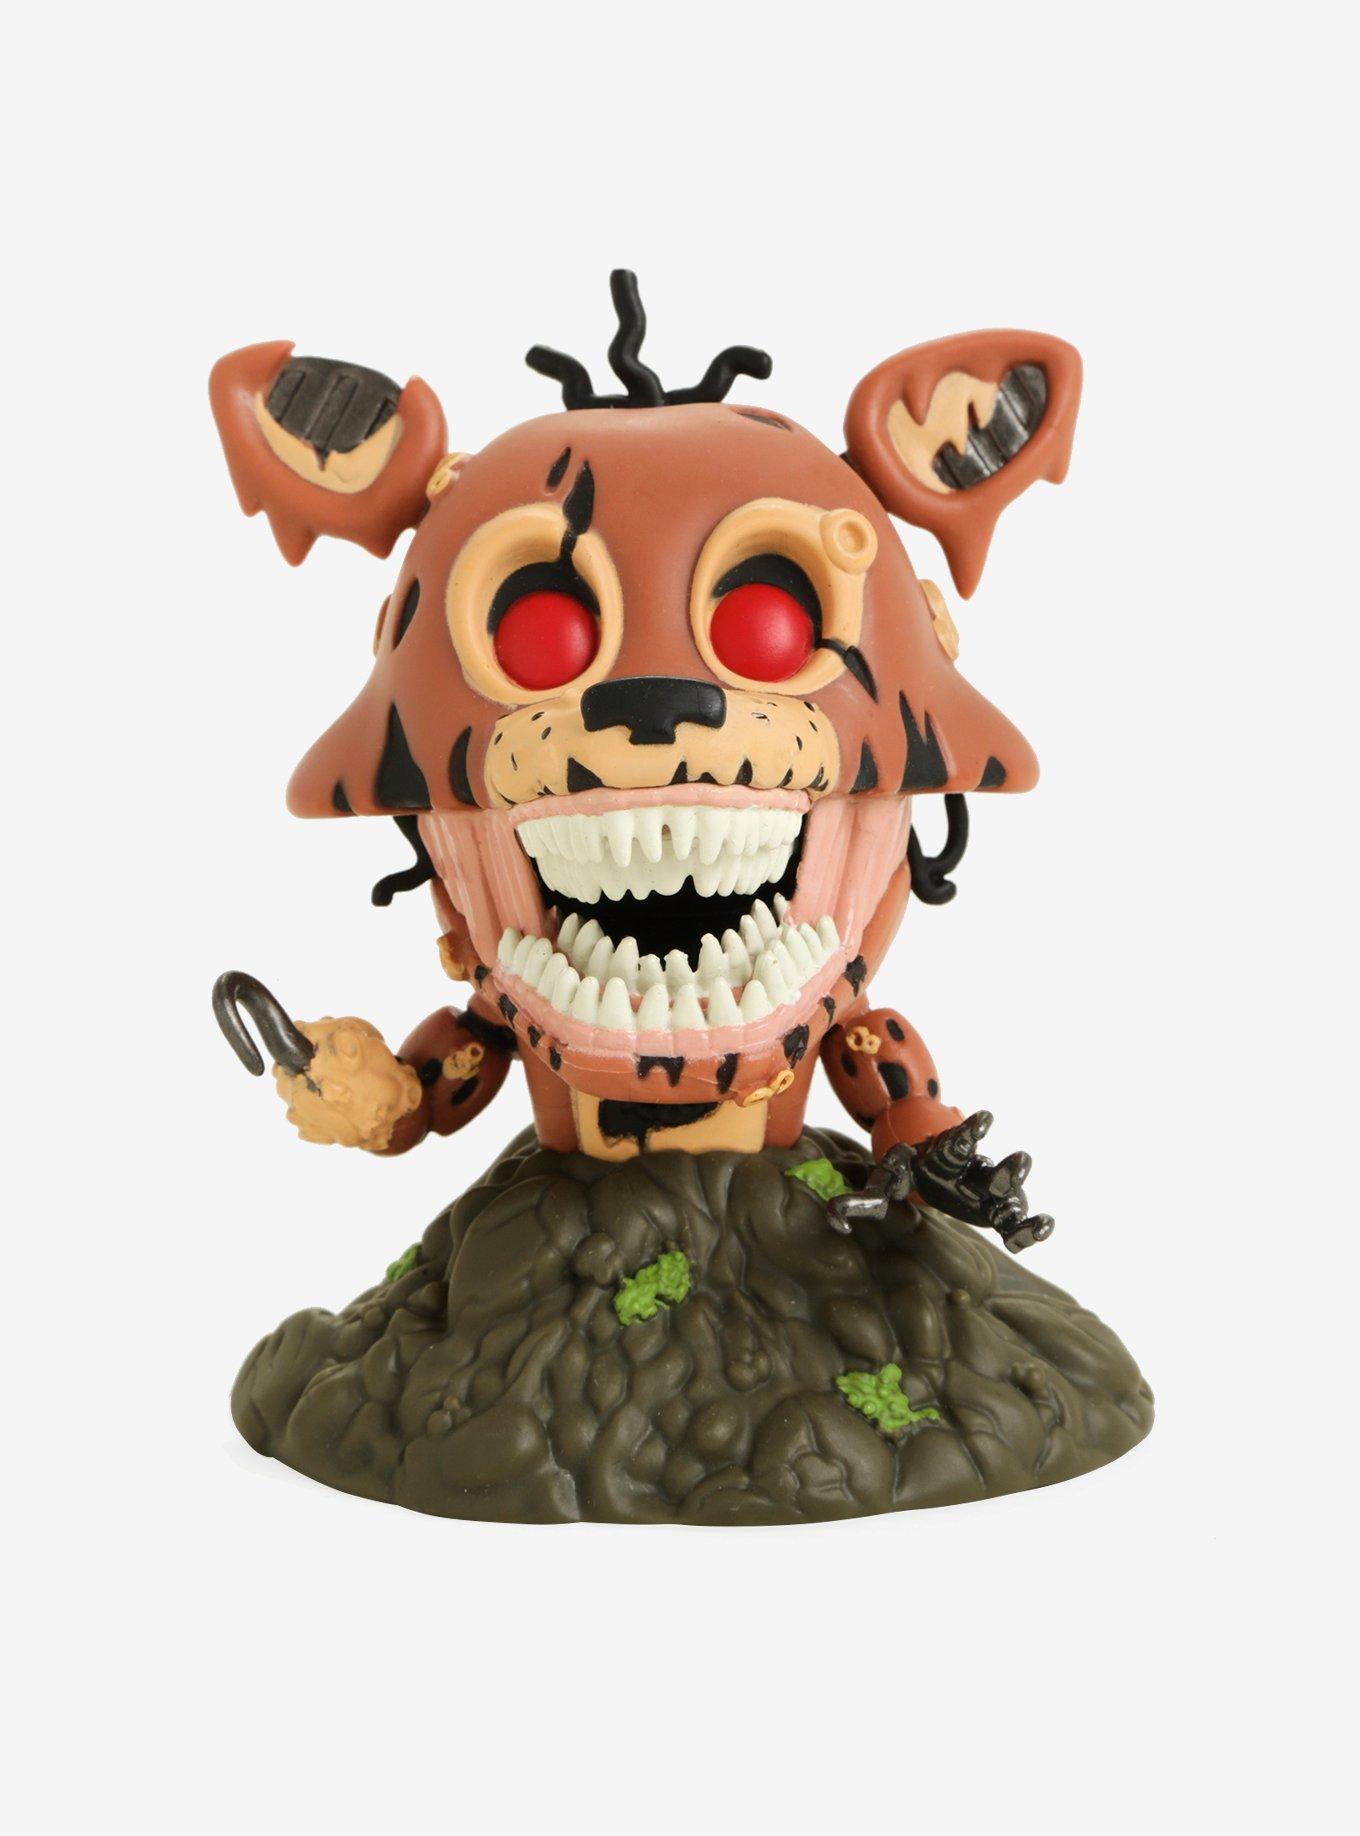  POP Five Nights at Freddy's The Twisted Ones - Twisted Wolf  Funko Pop! Vinyl Figure (Bundled with Compatible Pop Box Protector Case),  Multicolor, 3.75 inches : Toys & Games